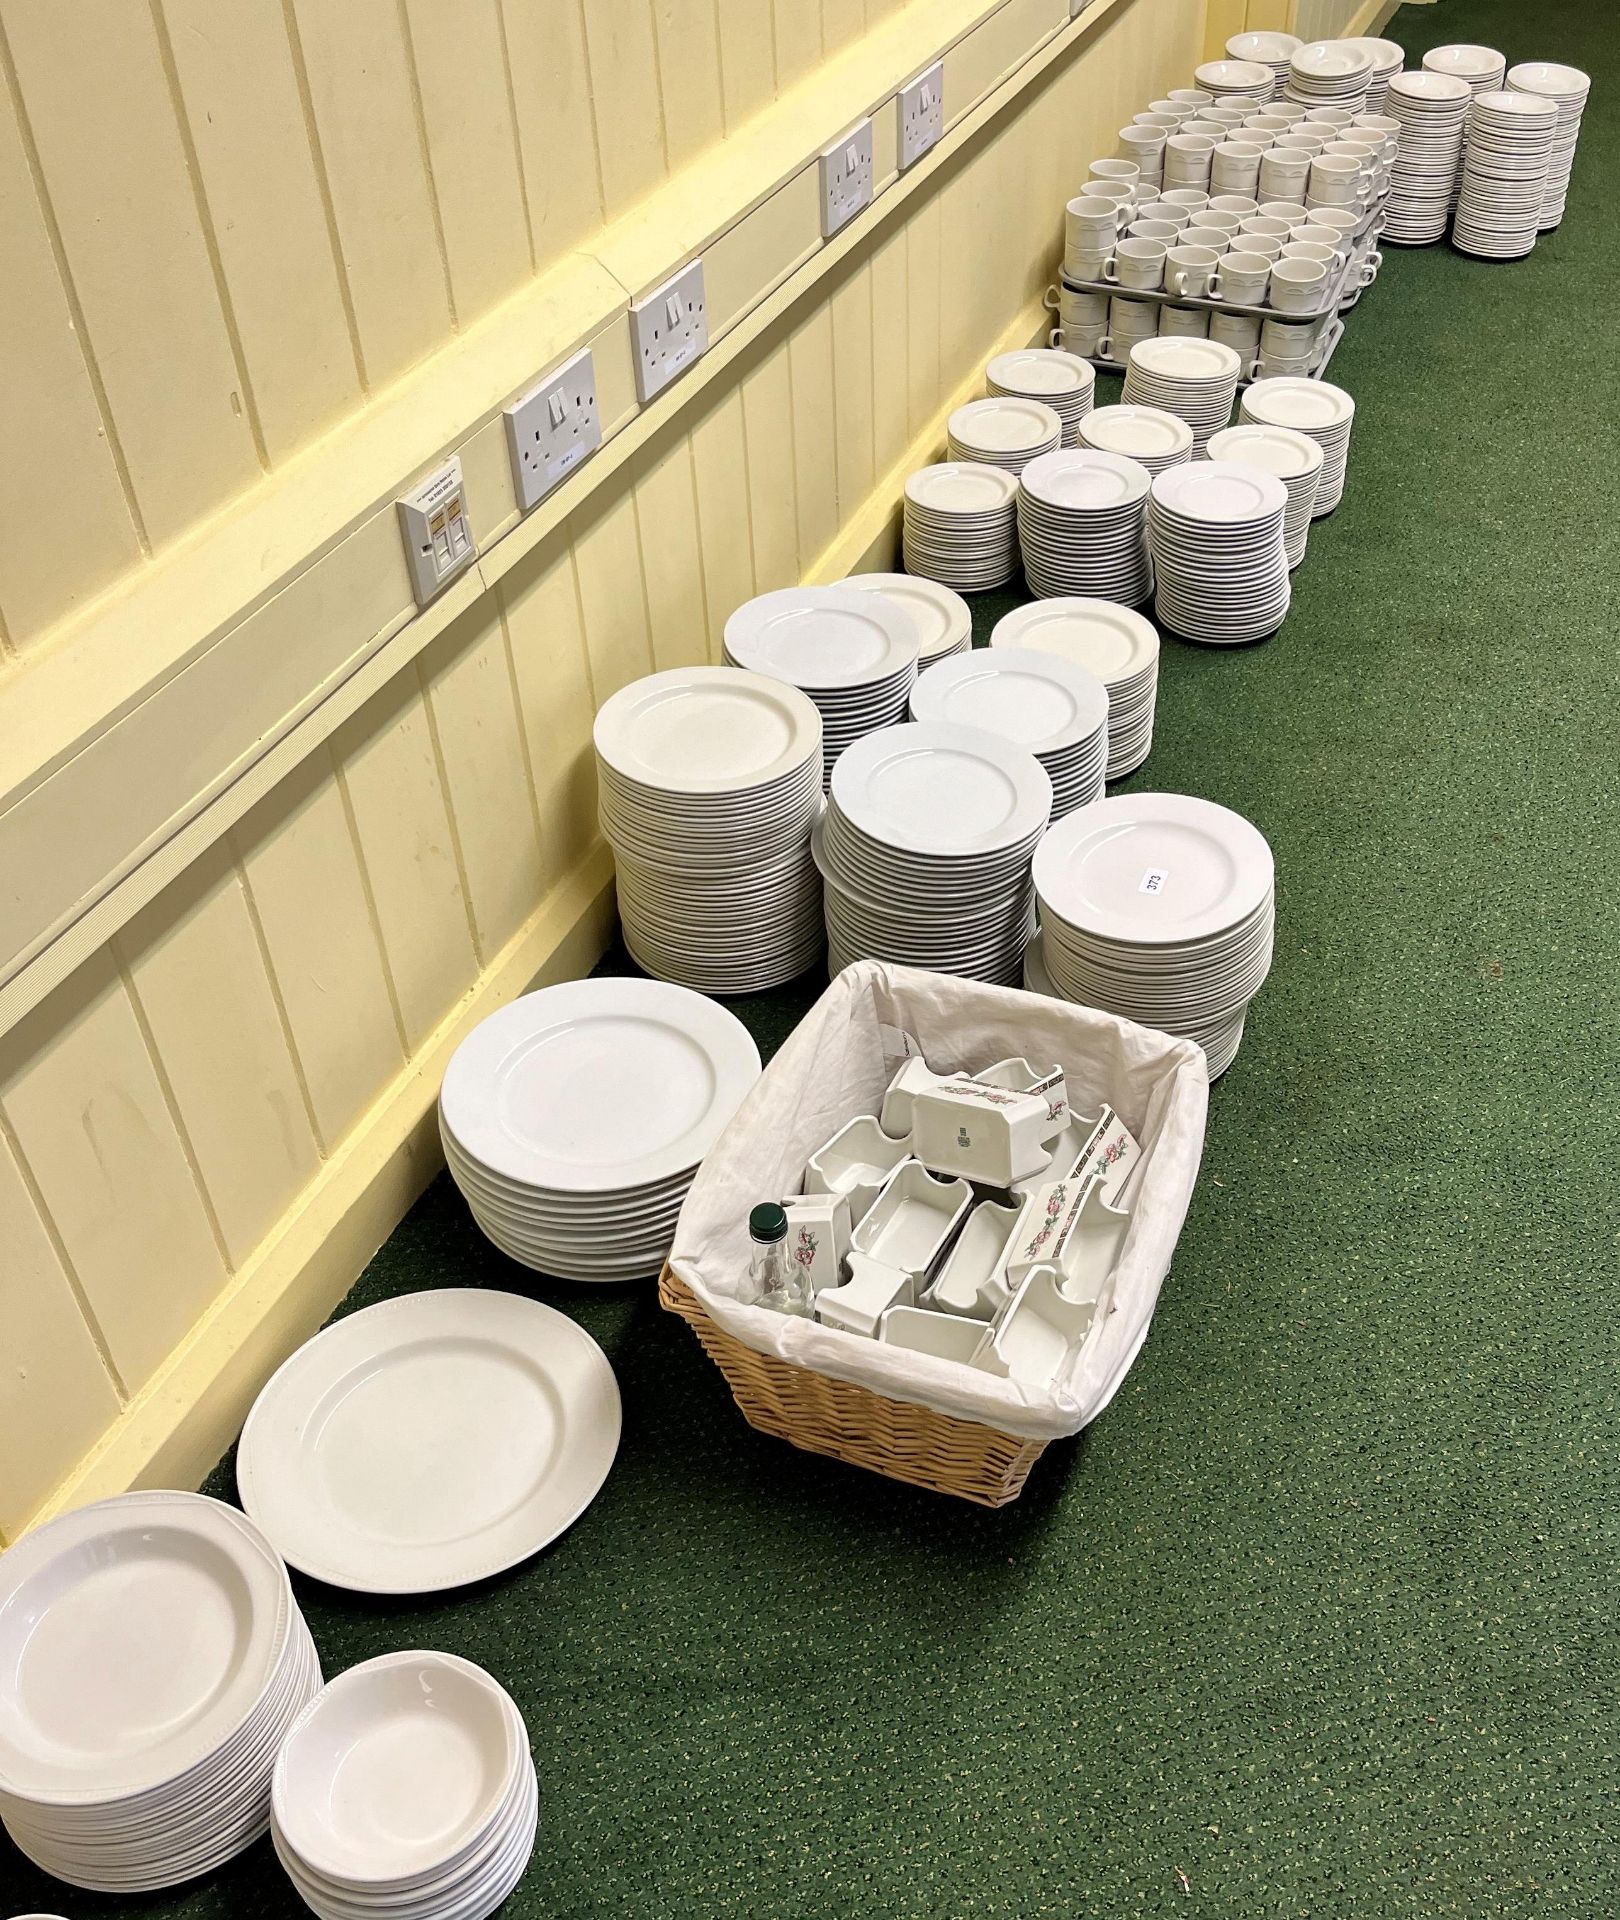 LARGE QUANITY OF WHITE PLATES, CUPS, SAUCERS ETC.